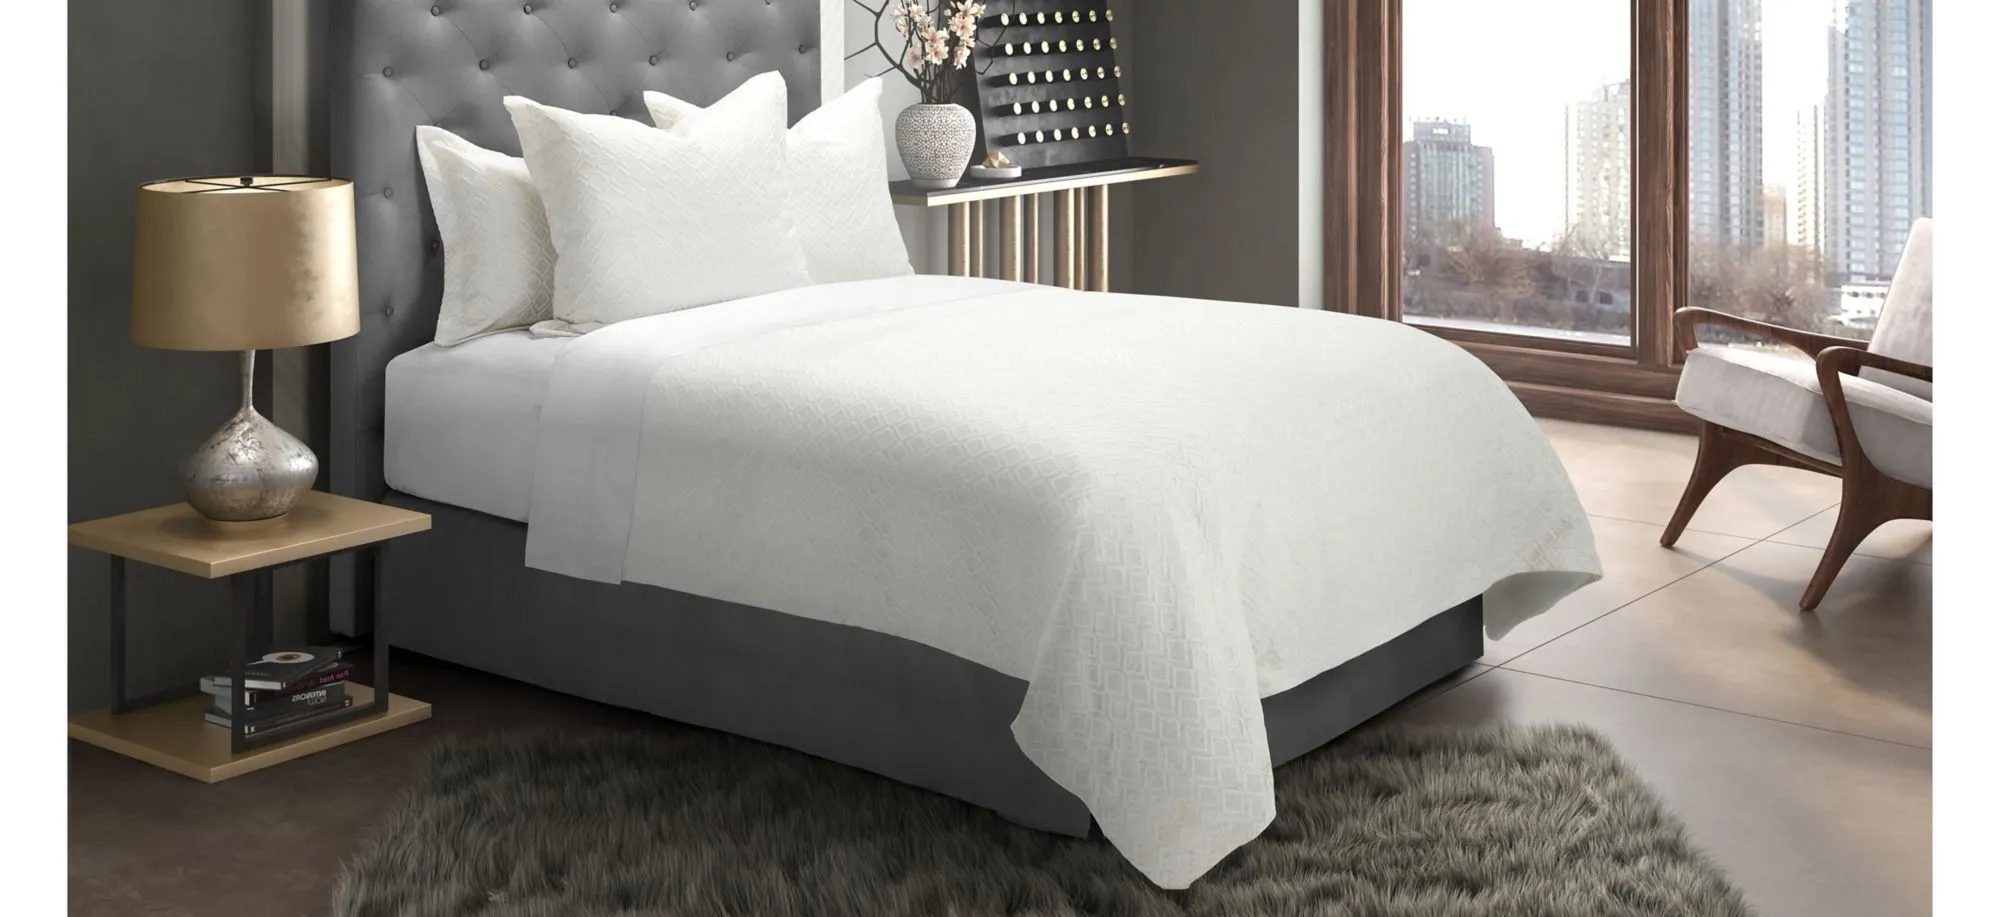 Kristel 6-Piece Duvet Set in Natural by Amini Innovation